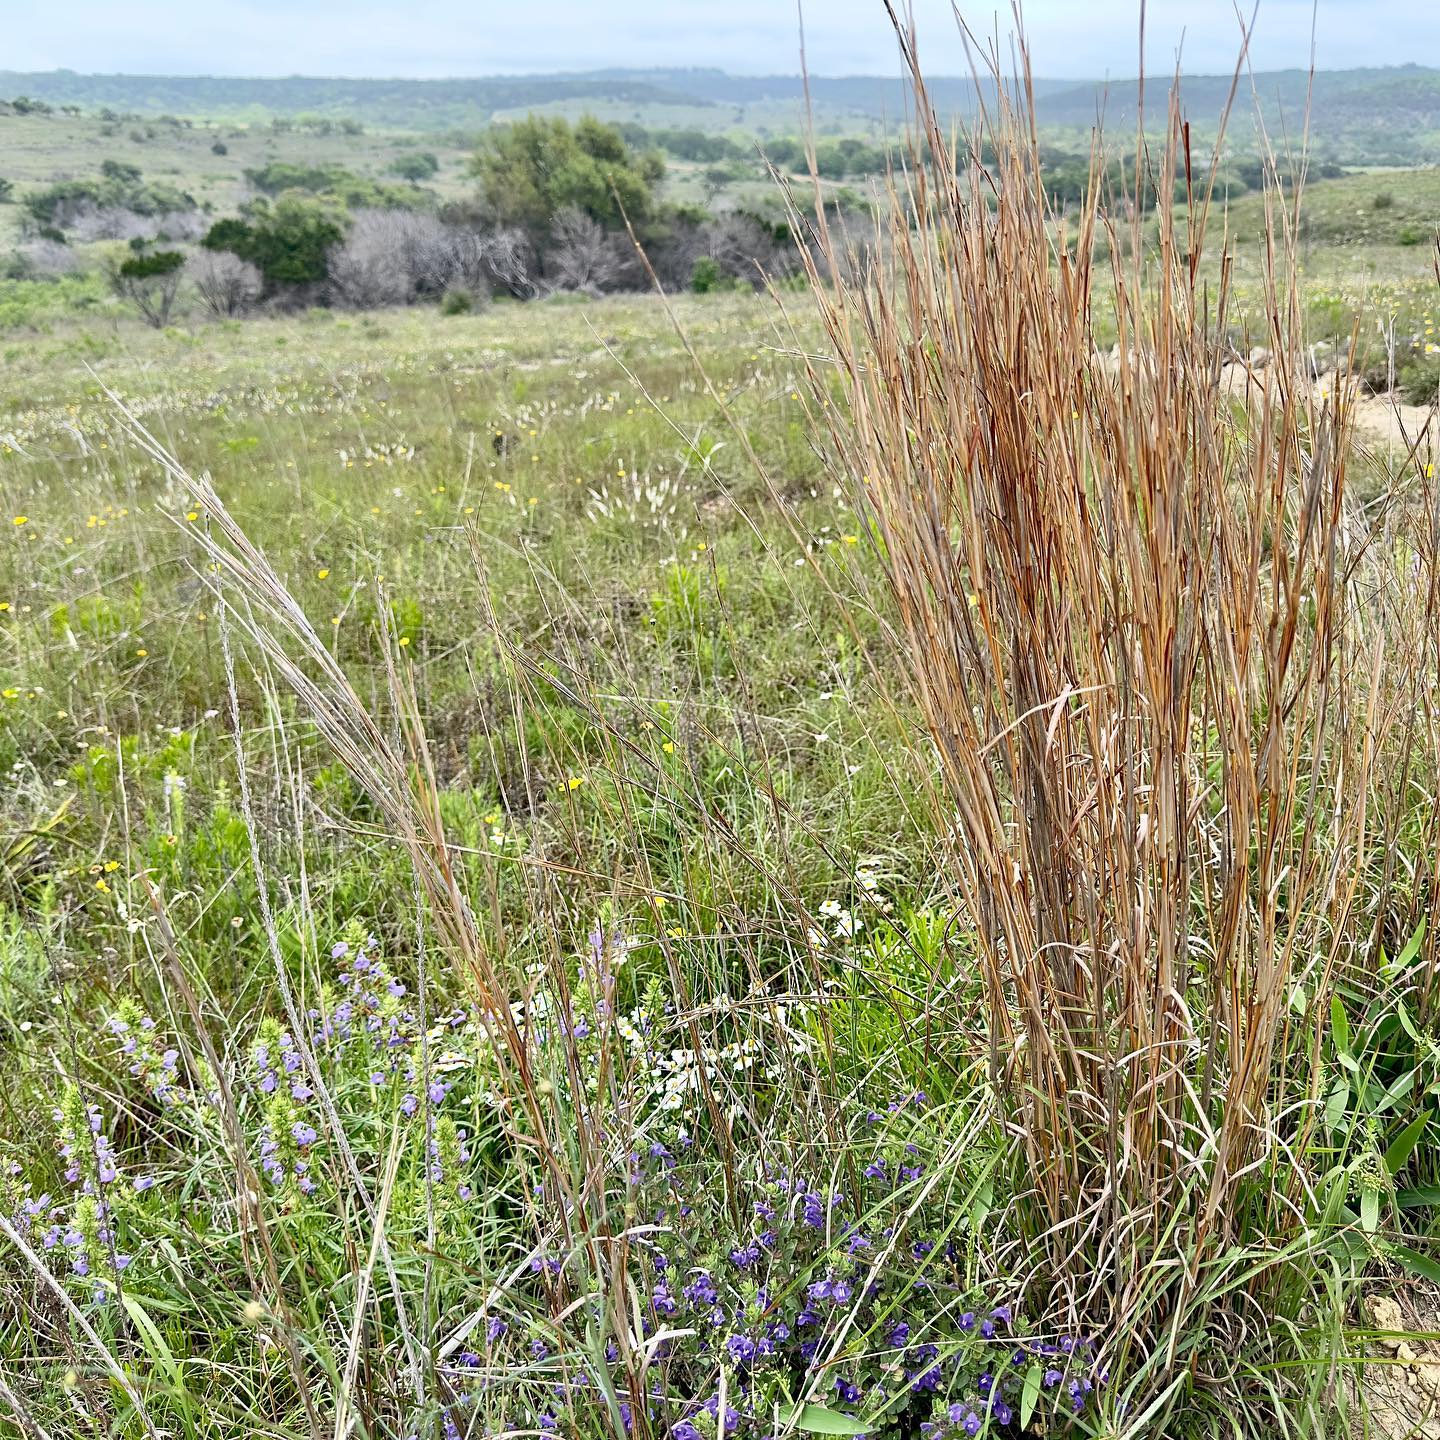 View of canyonlands with little bluestem and wildflowers in foreground